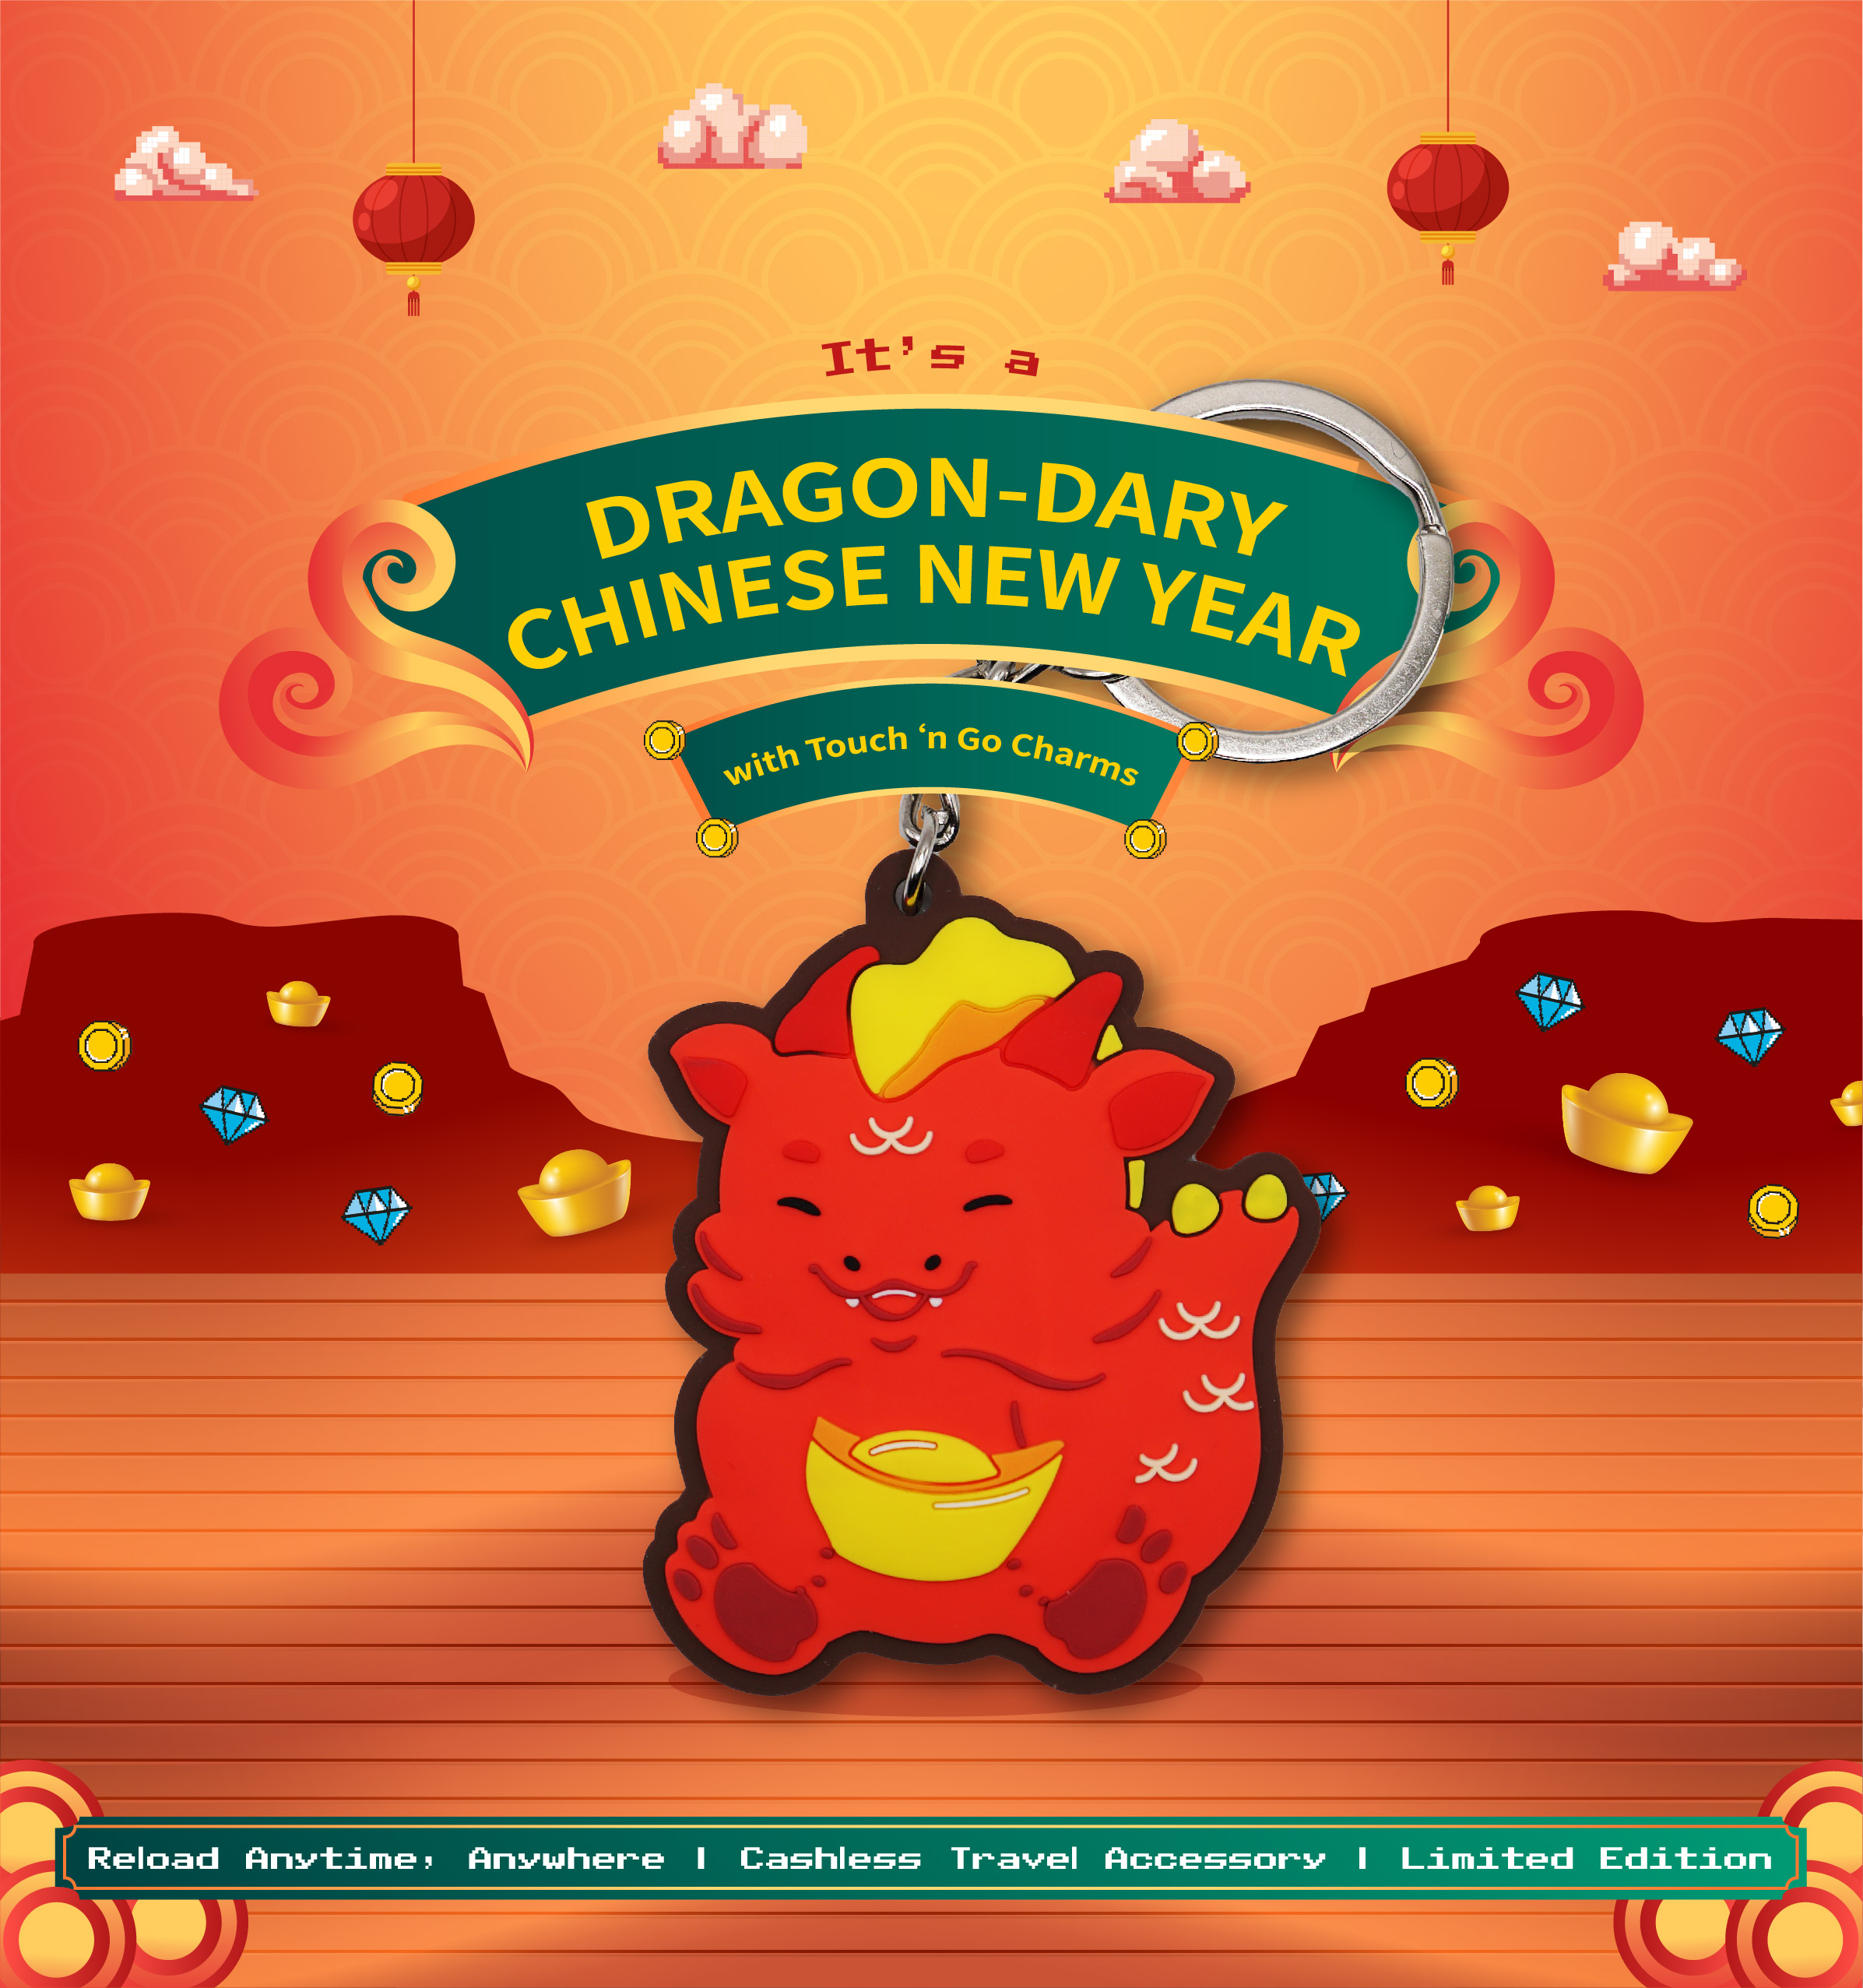 Ushering in the Year of the Dragon with Touch ‘n Go’s First-ever Chinese New Year Edition Charm